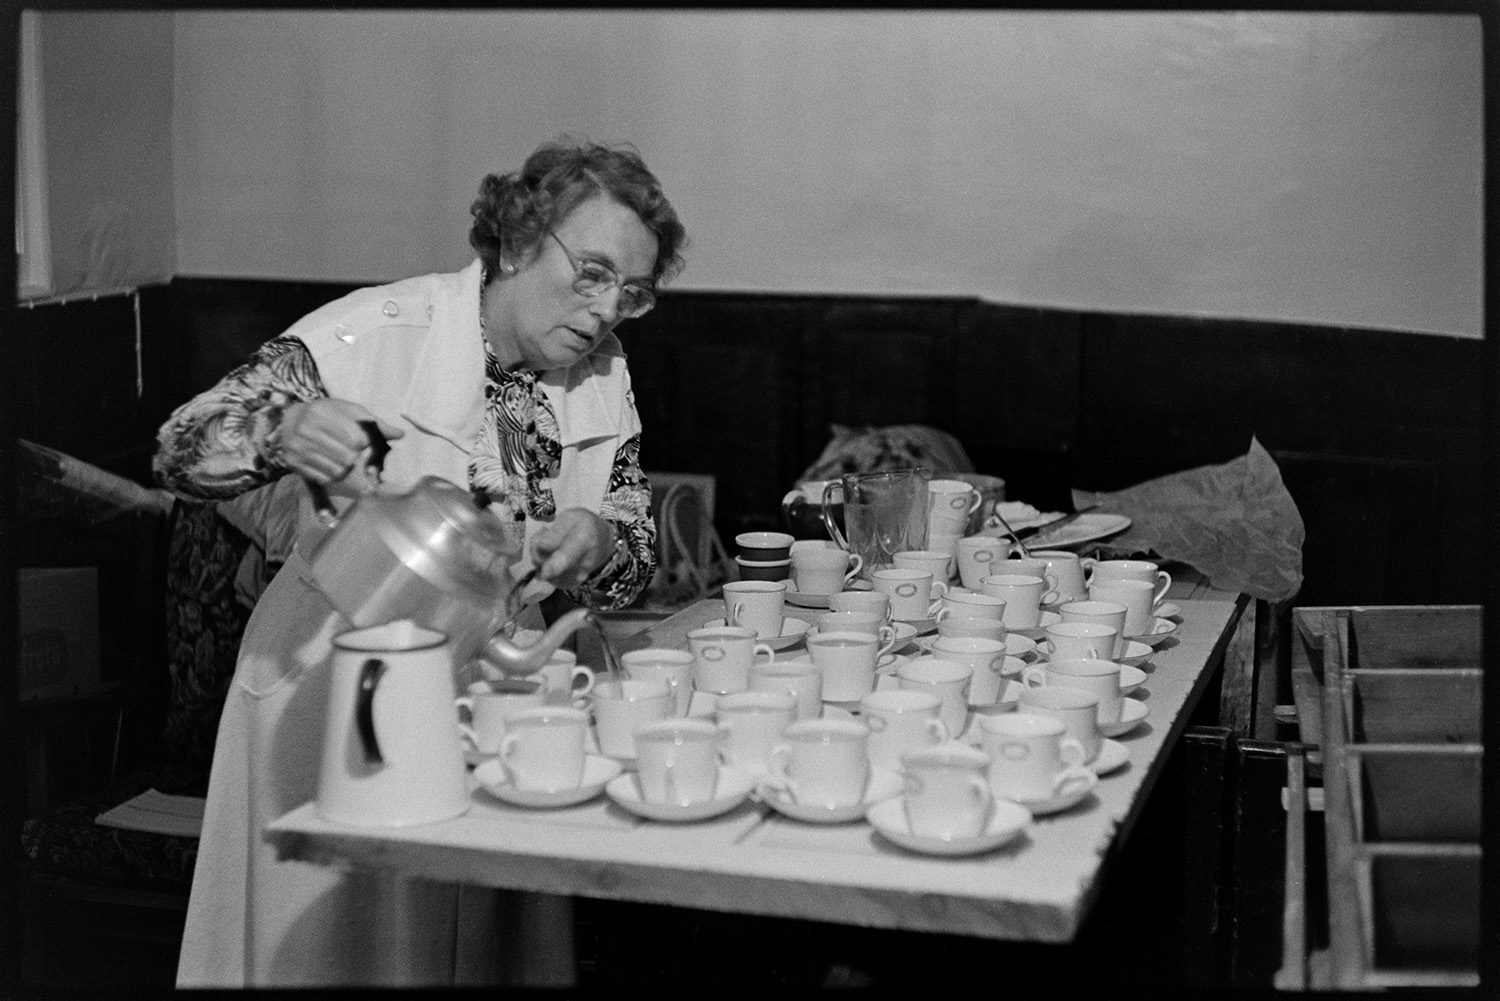 Congregational chapel Harvest supper, sale of produce after supper. Women chatting.
[A woman pouring tea after the Harvest supper in Chulmleigh Congregational chapel. White china cups and saucers and a white enamel jug are laid out on a wooden table.]